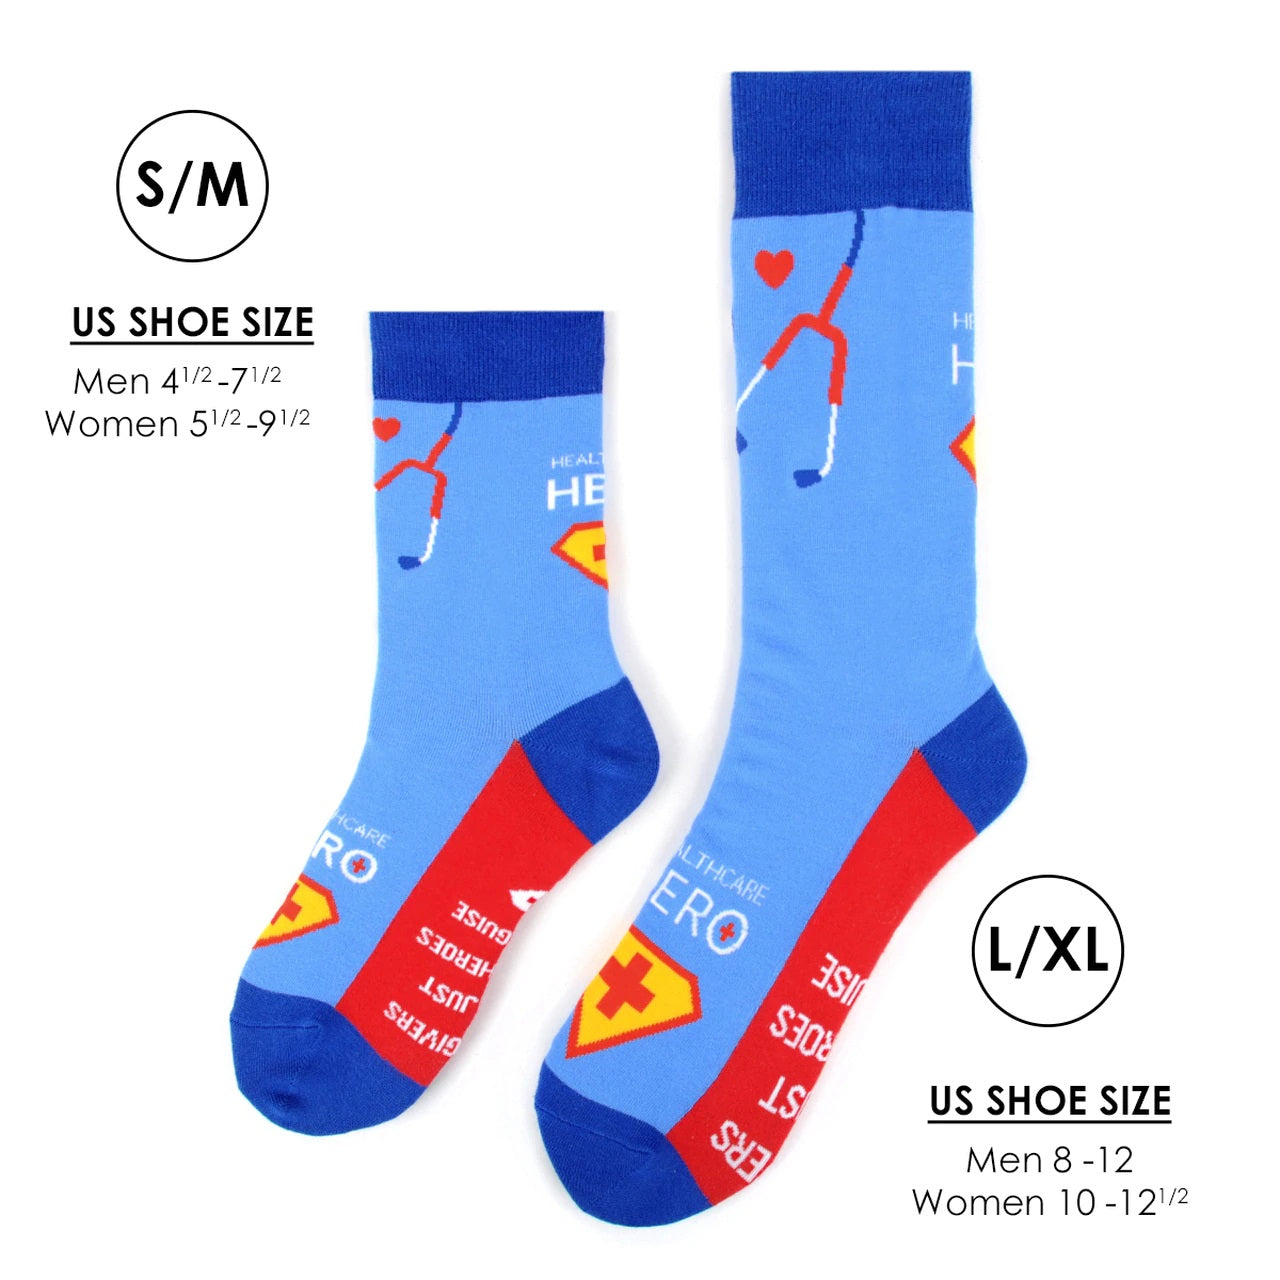 MashasCorner.com   Health Care Heroes -Superheroes- Ultra Premium Socks  Material: 68% cotton, 29% polyester, 3% spandex Sizes: available in S/M and L/XL S/M: men shoe size: 4.5-7.5, ladies shoe size: 5.5-9.5 L/XL: men shoe size: 8-12, ladies shoe size: 10-10.5 Unisex style